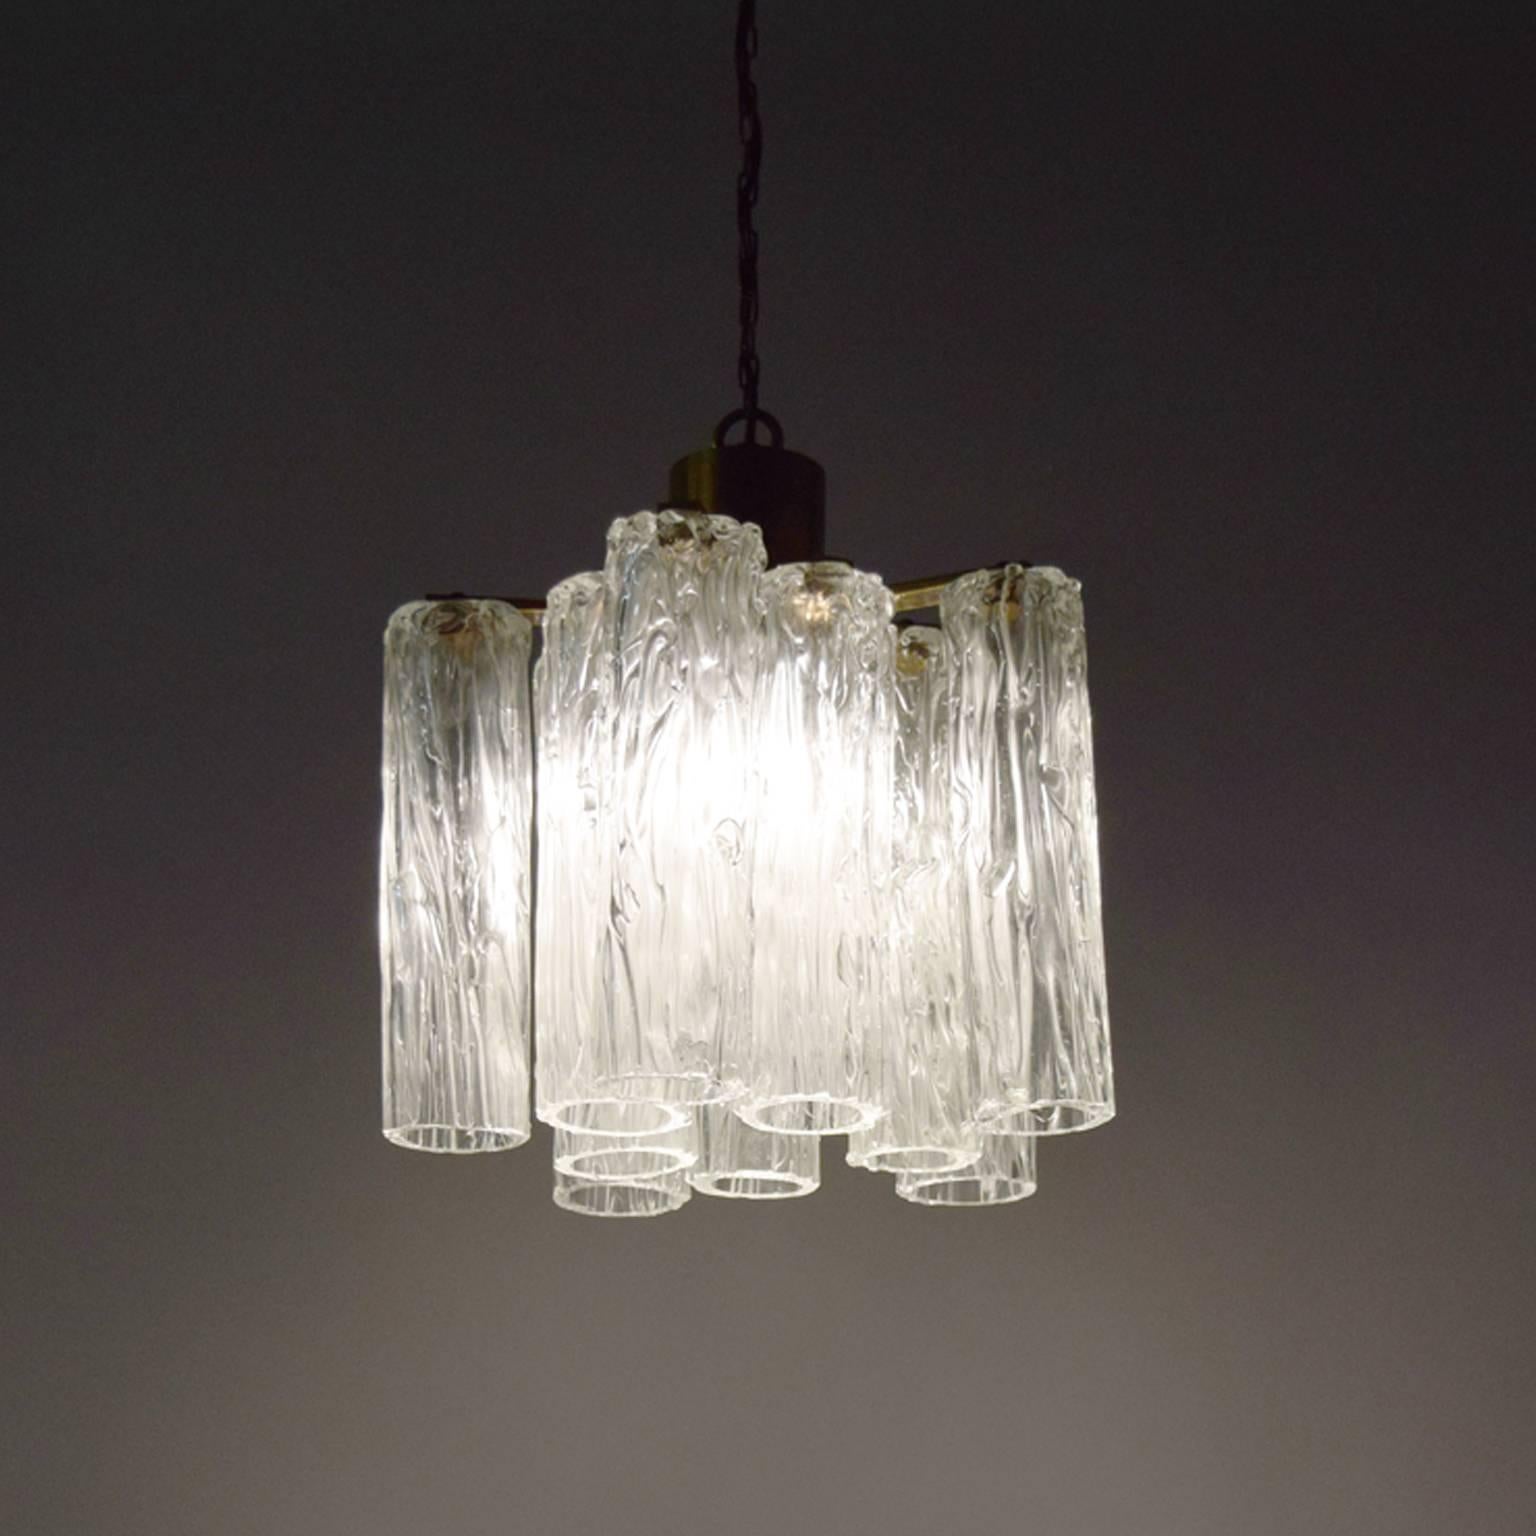 1940s Murano Chandelier Attributed to Barovier & Toso In Excellent Condition For Sale In Hudson, NY